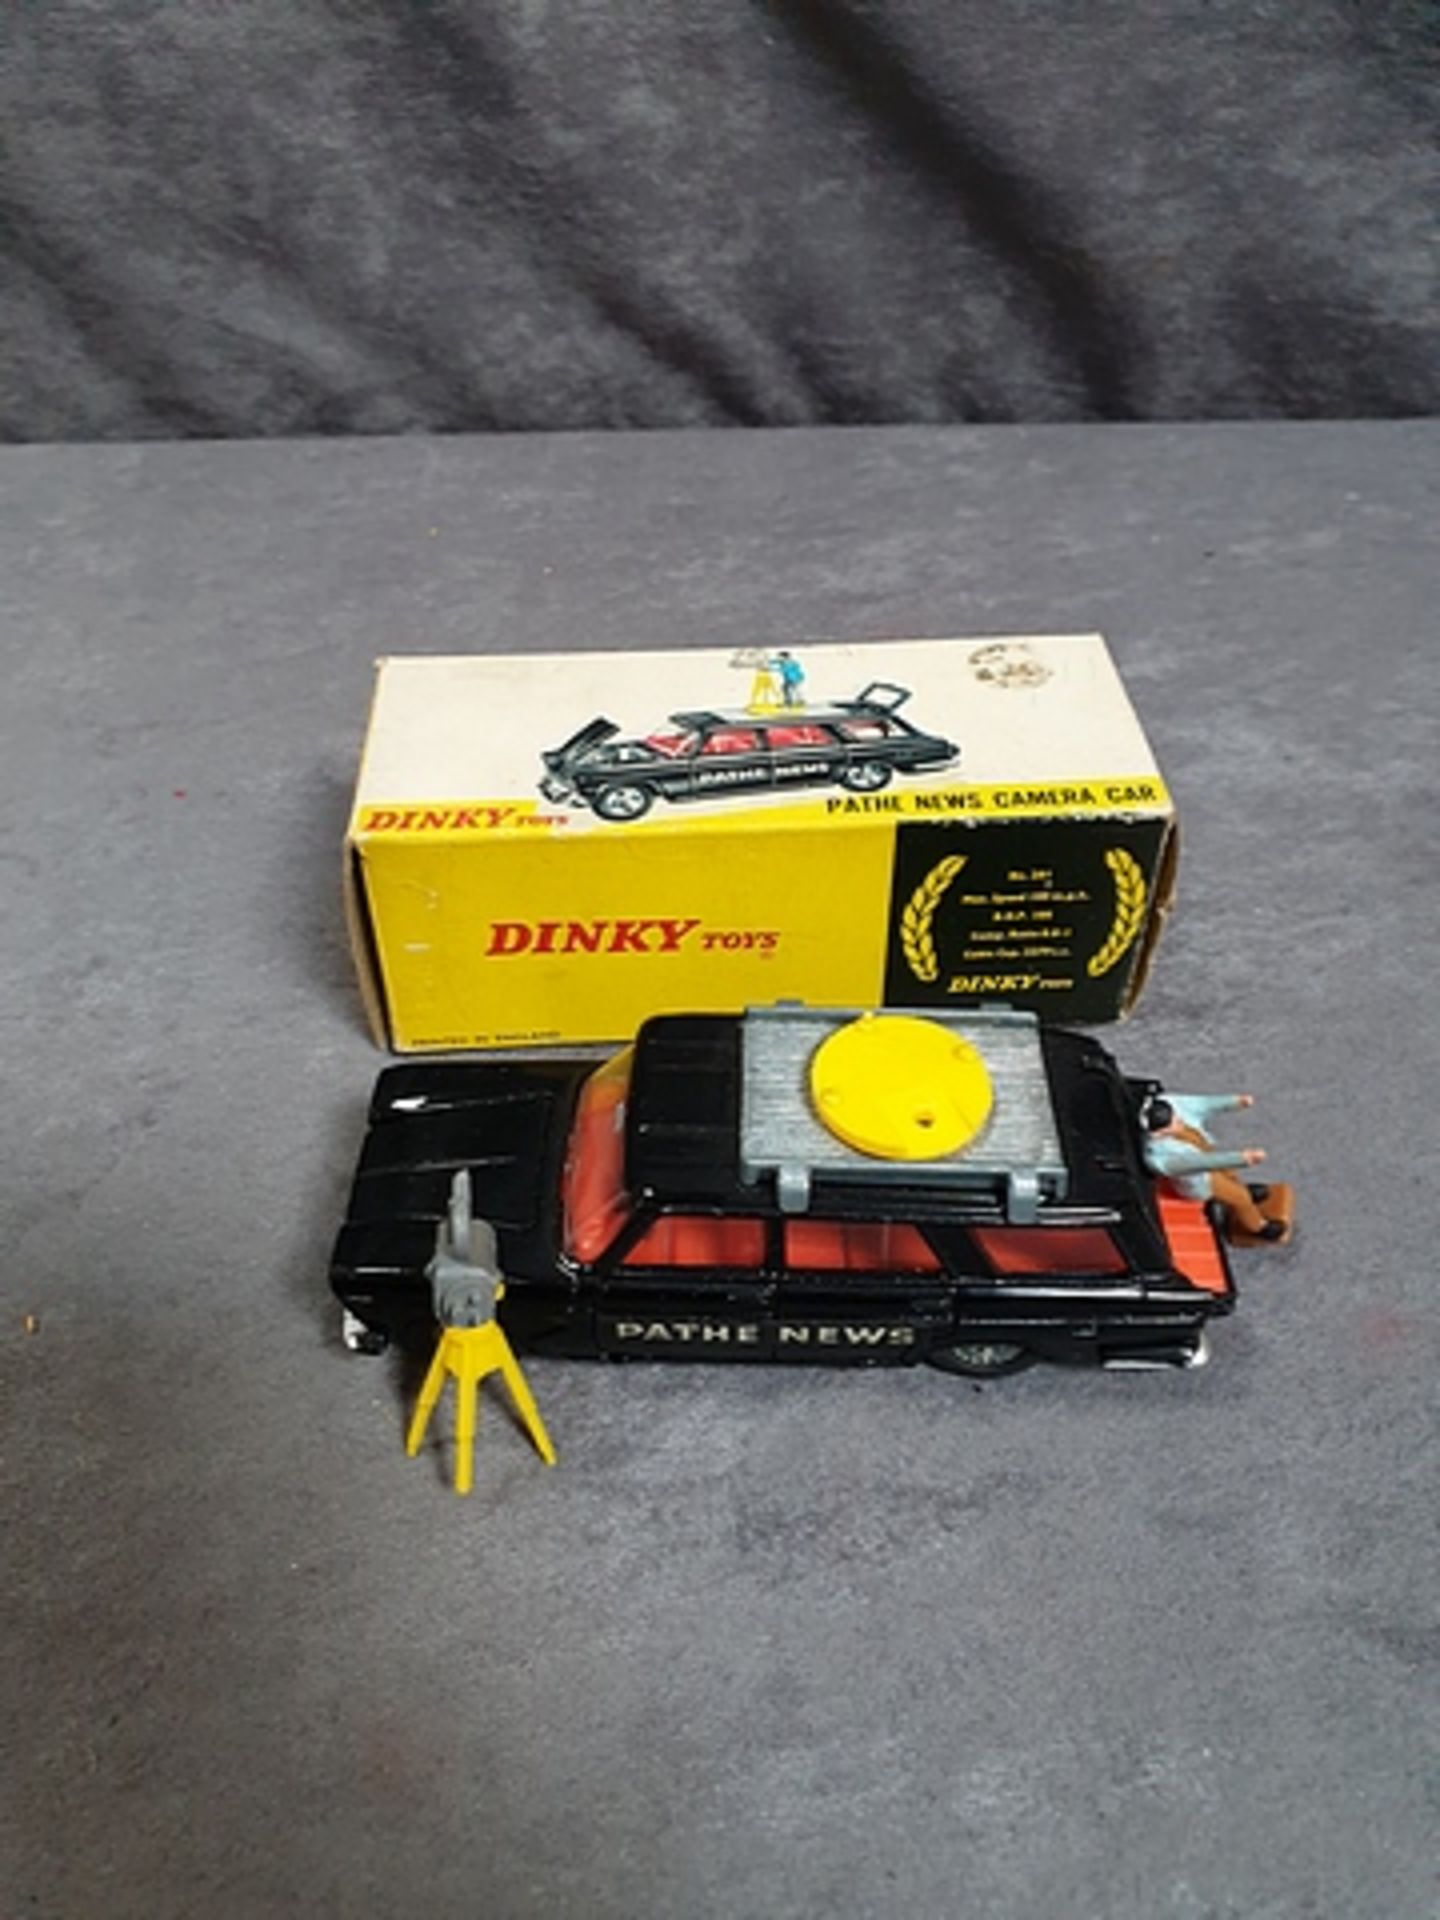 Dinky Diecast Toys #281 Path News Camera Car model in Mint condition Complete In Box